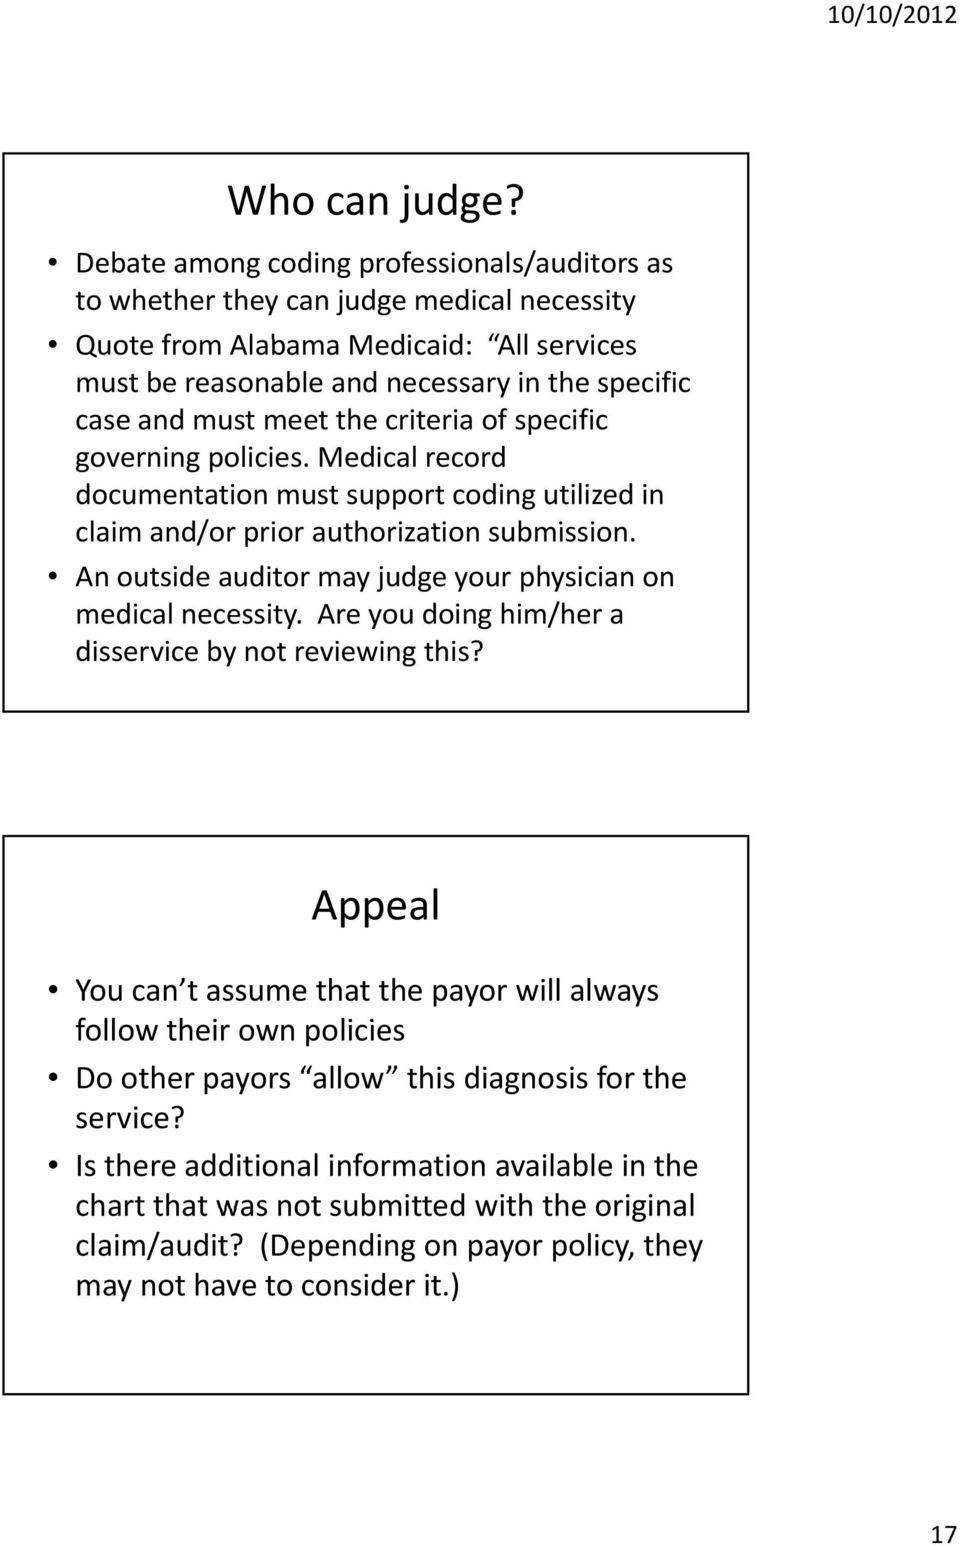 must meet the criteria of specific governing policies. Medical record documentation must support coding utilized in claim li and/or prior authorization ti submission.